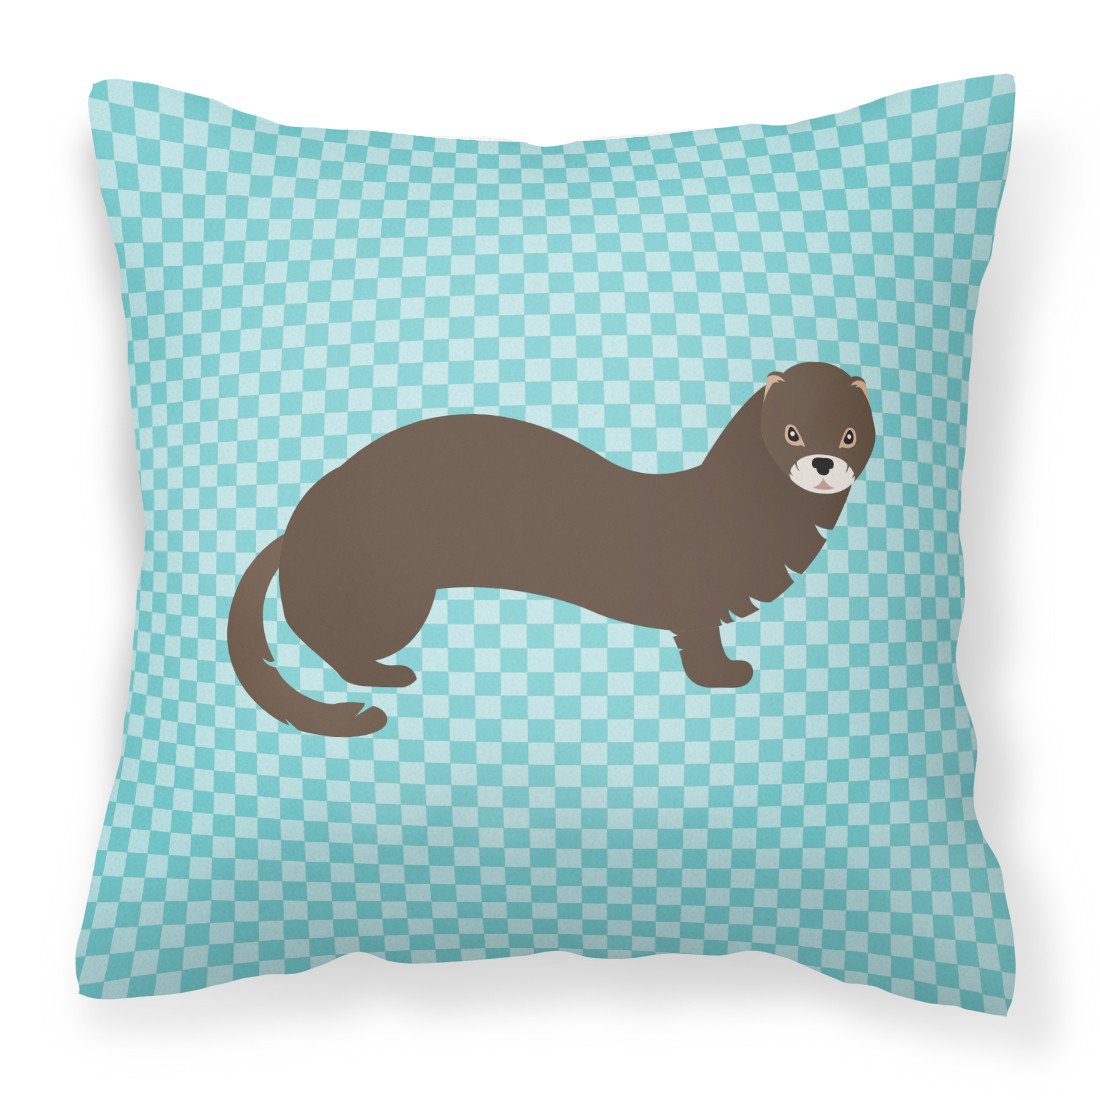 Russian or European Mink Blue Check Fabric Decorative Pillow BB8042PW1818 by Caroline's Treasures